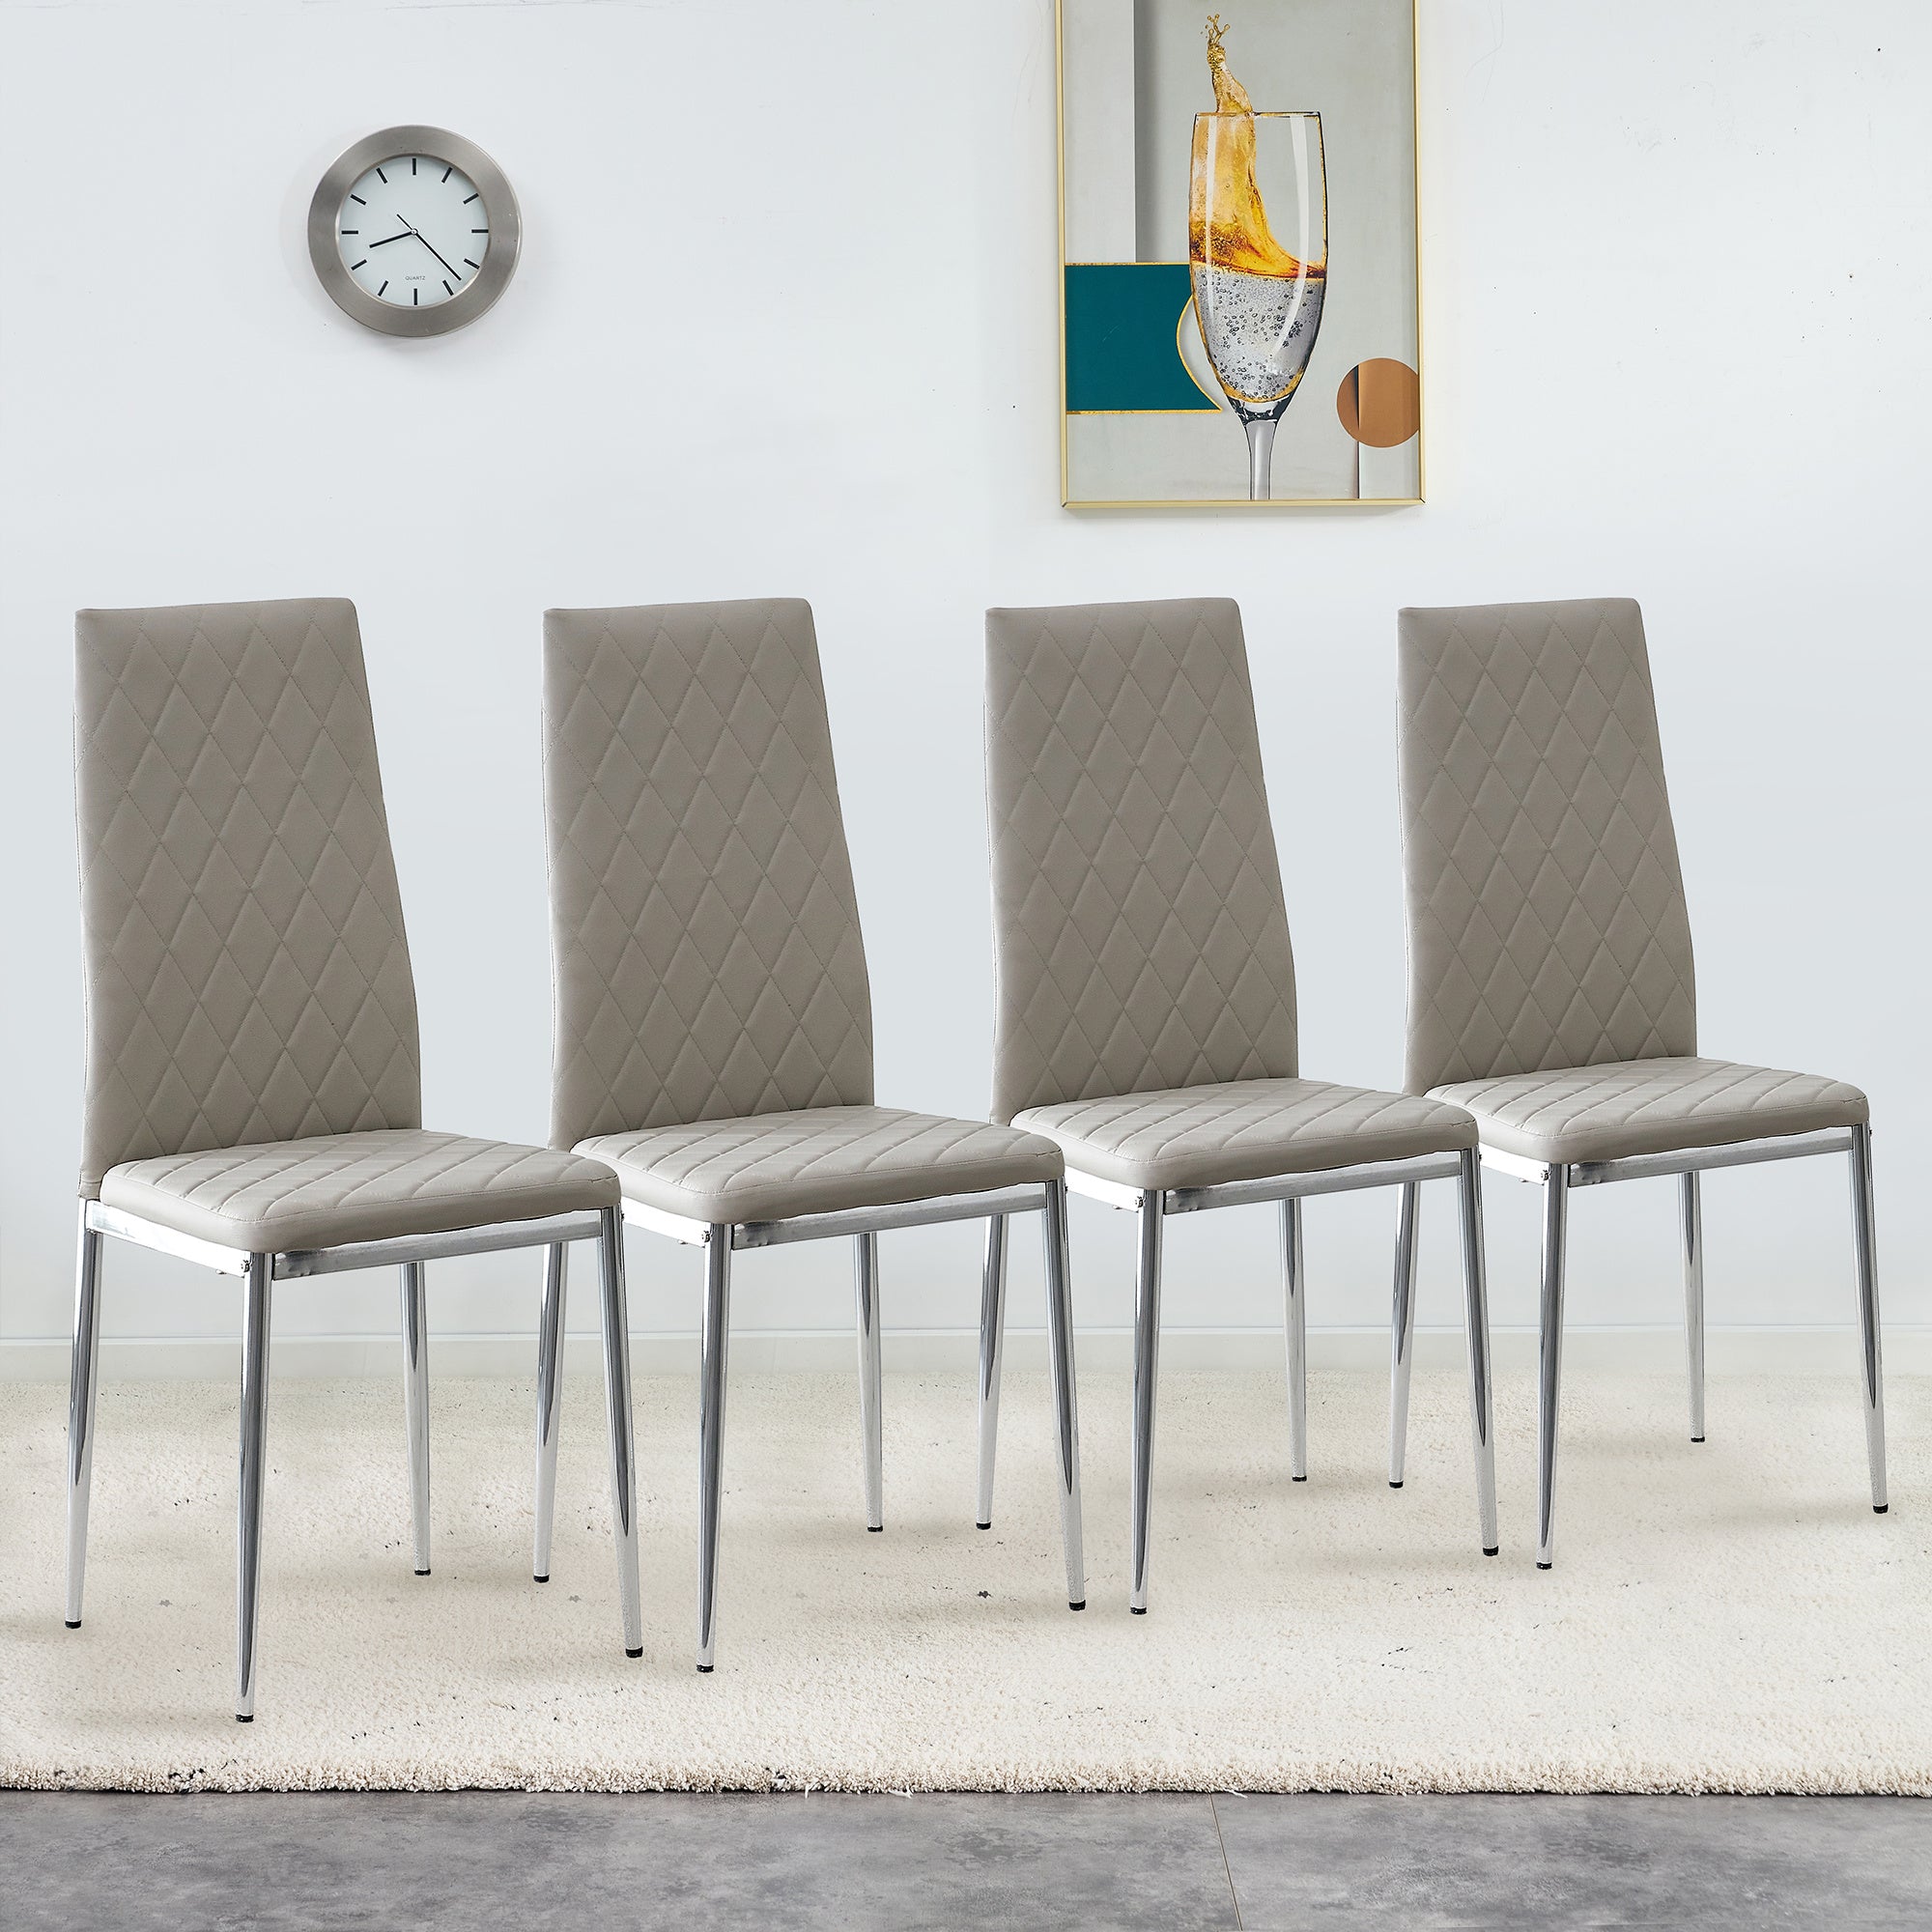 Grid Shaped Armless High Back Dining Chair, 4-piece set, Office Chair. Applicable to DiningRoom, Living Room, Kitchen and Office. Chair and Electroplated Metal Leg